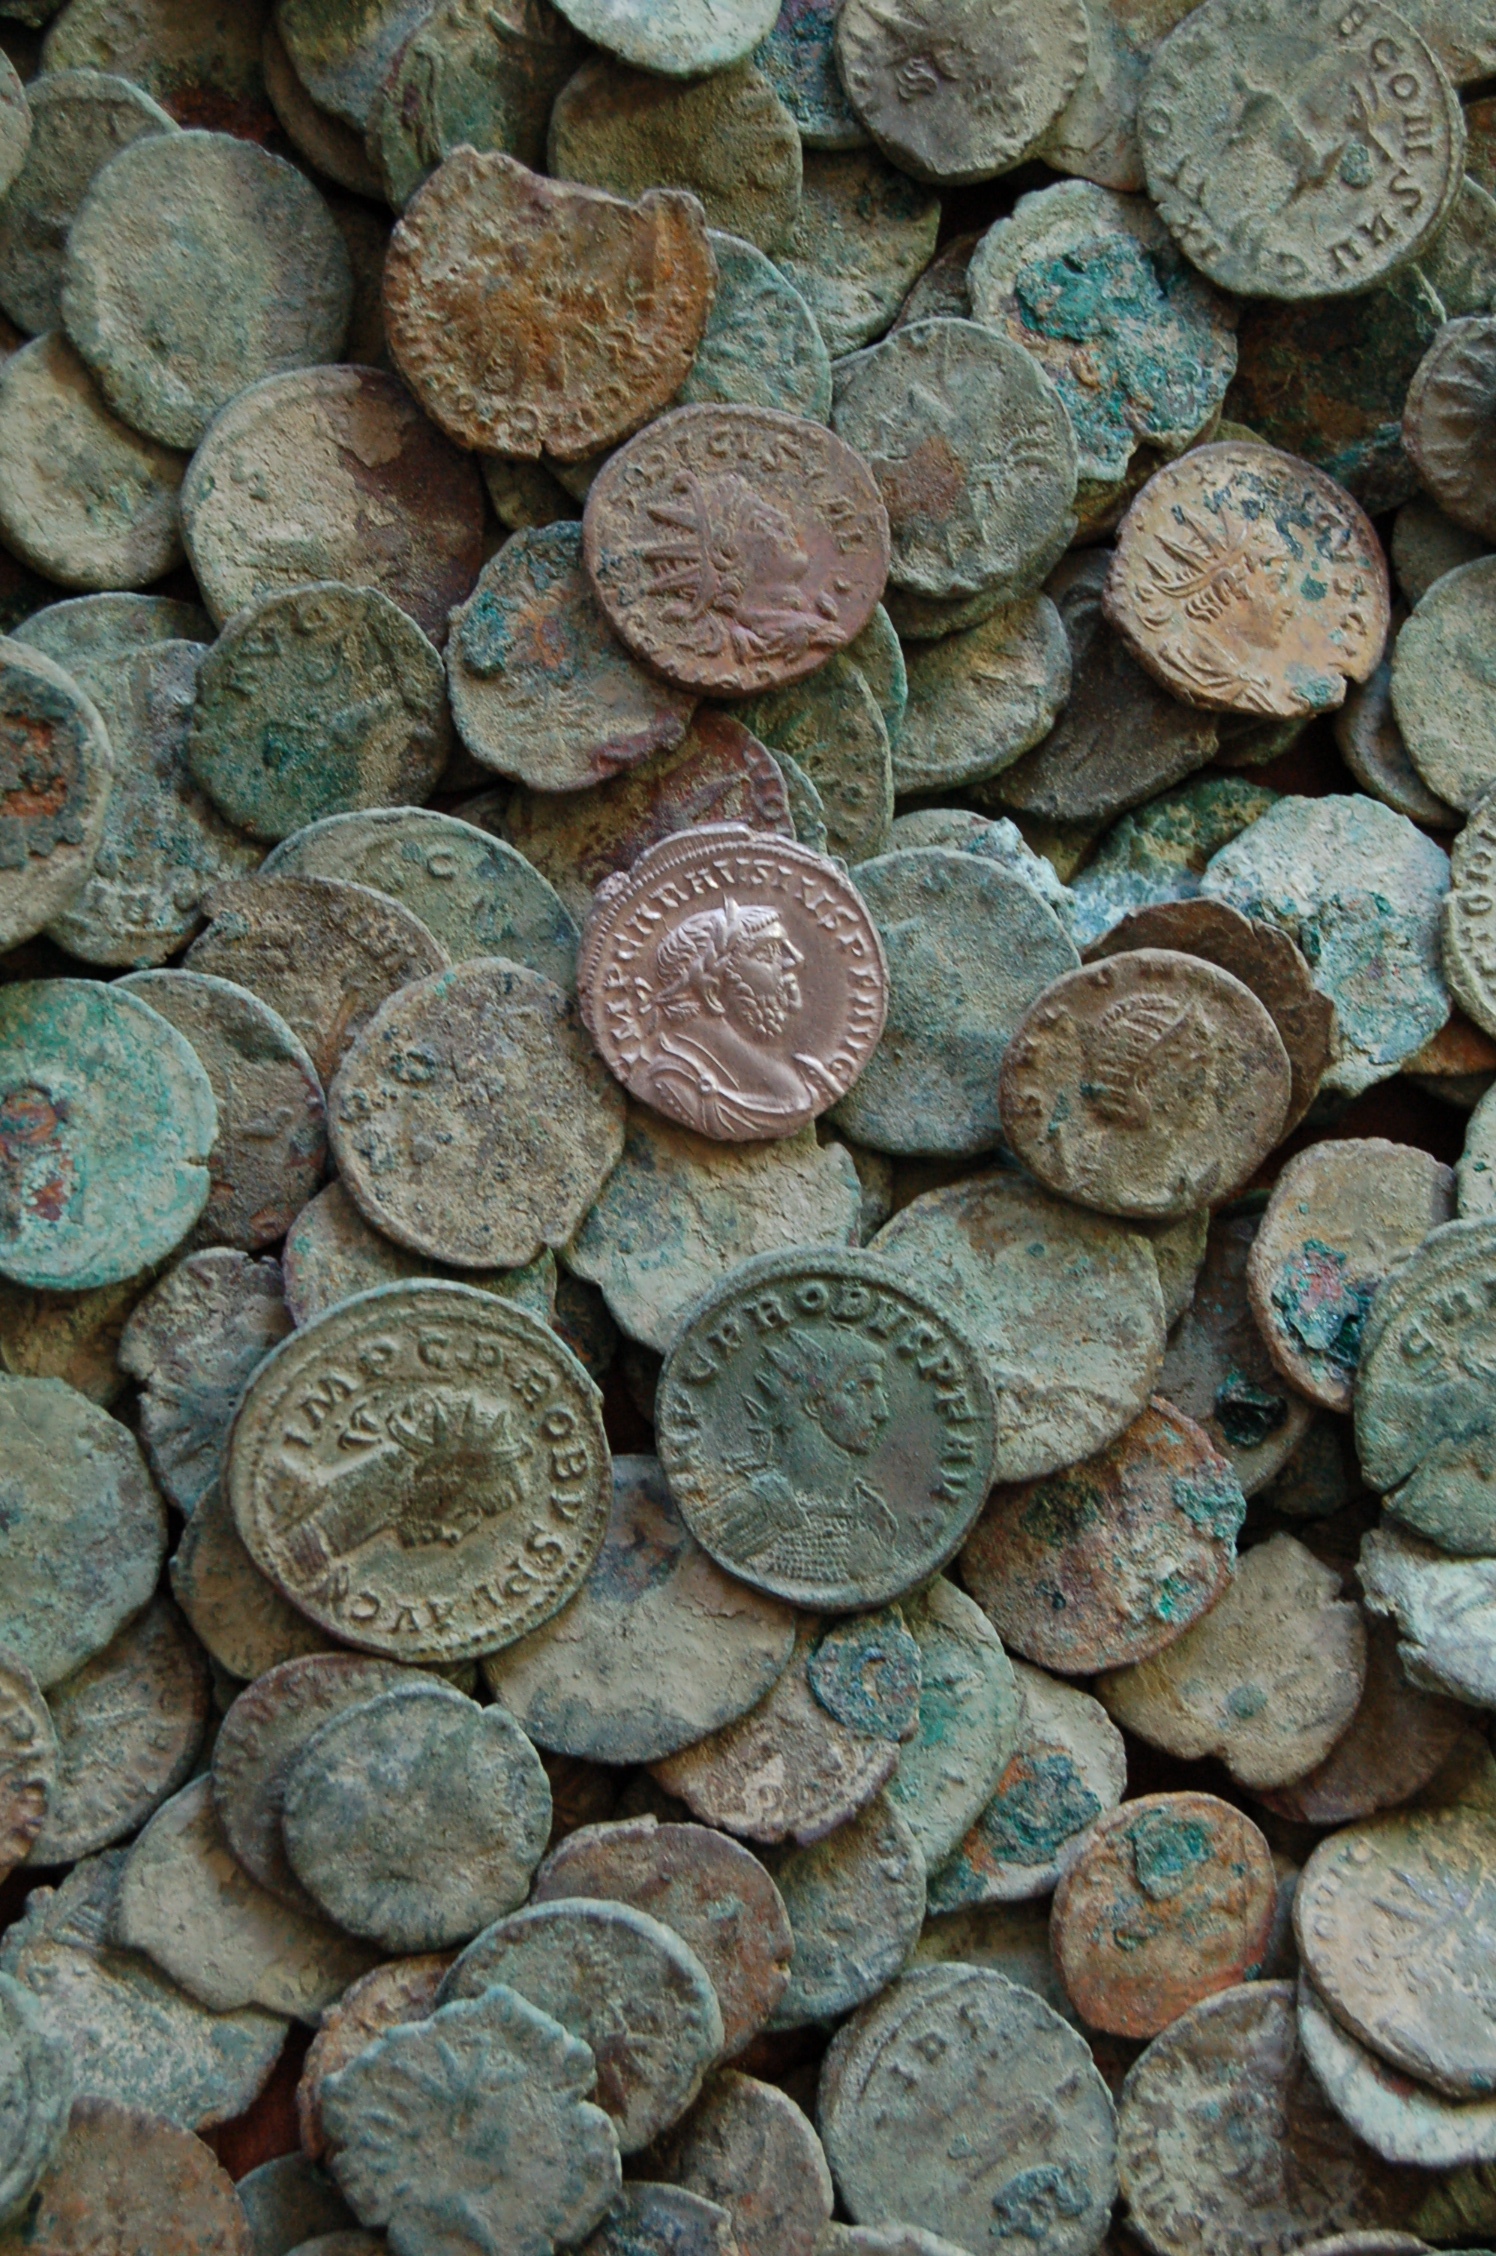 coins piled together to make an interesting background